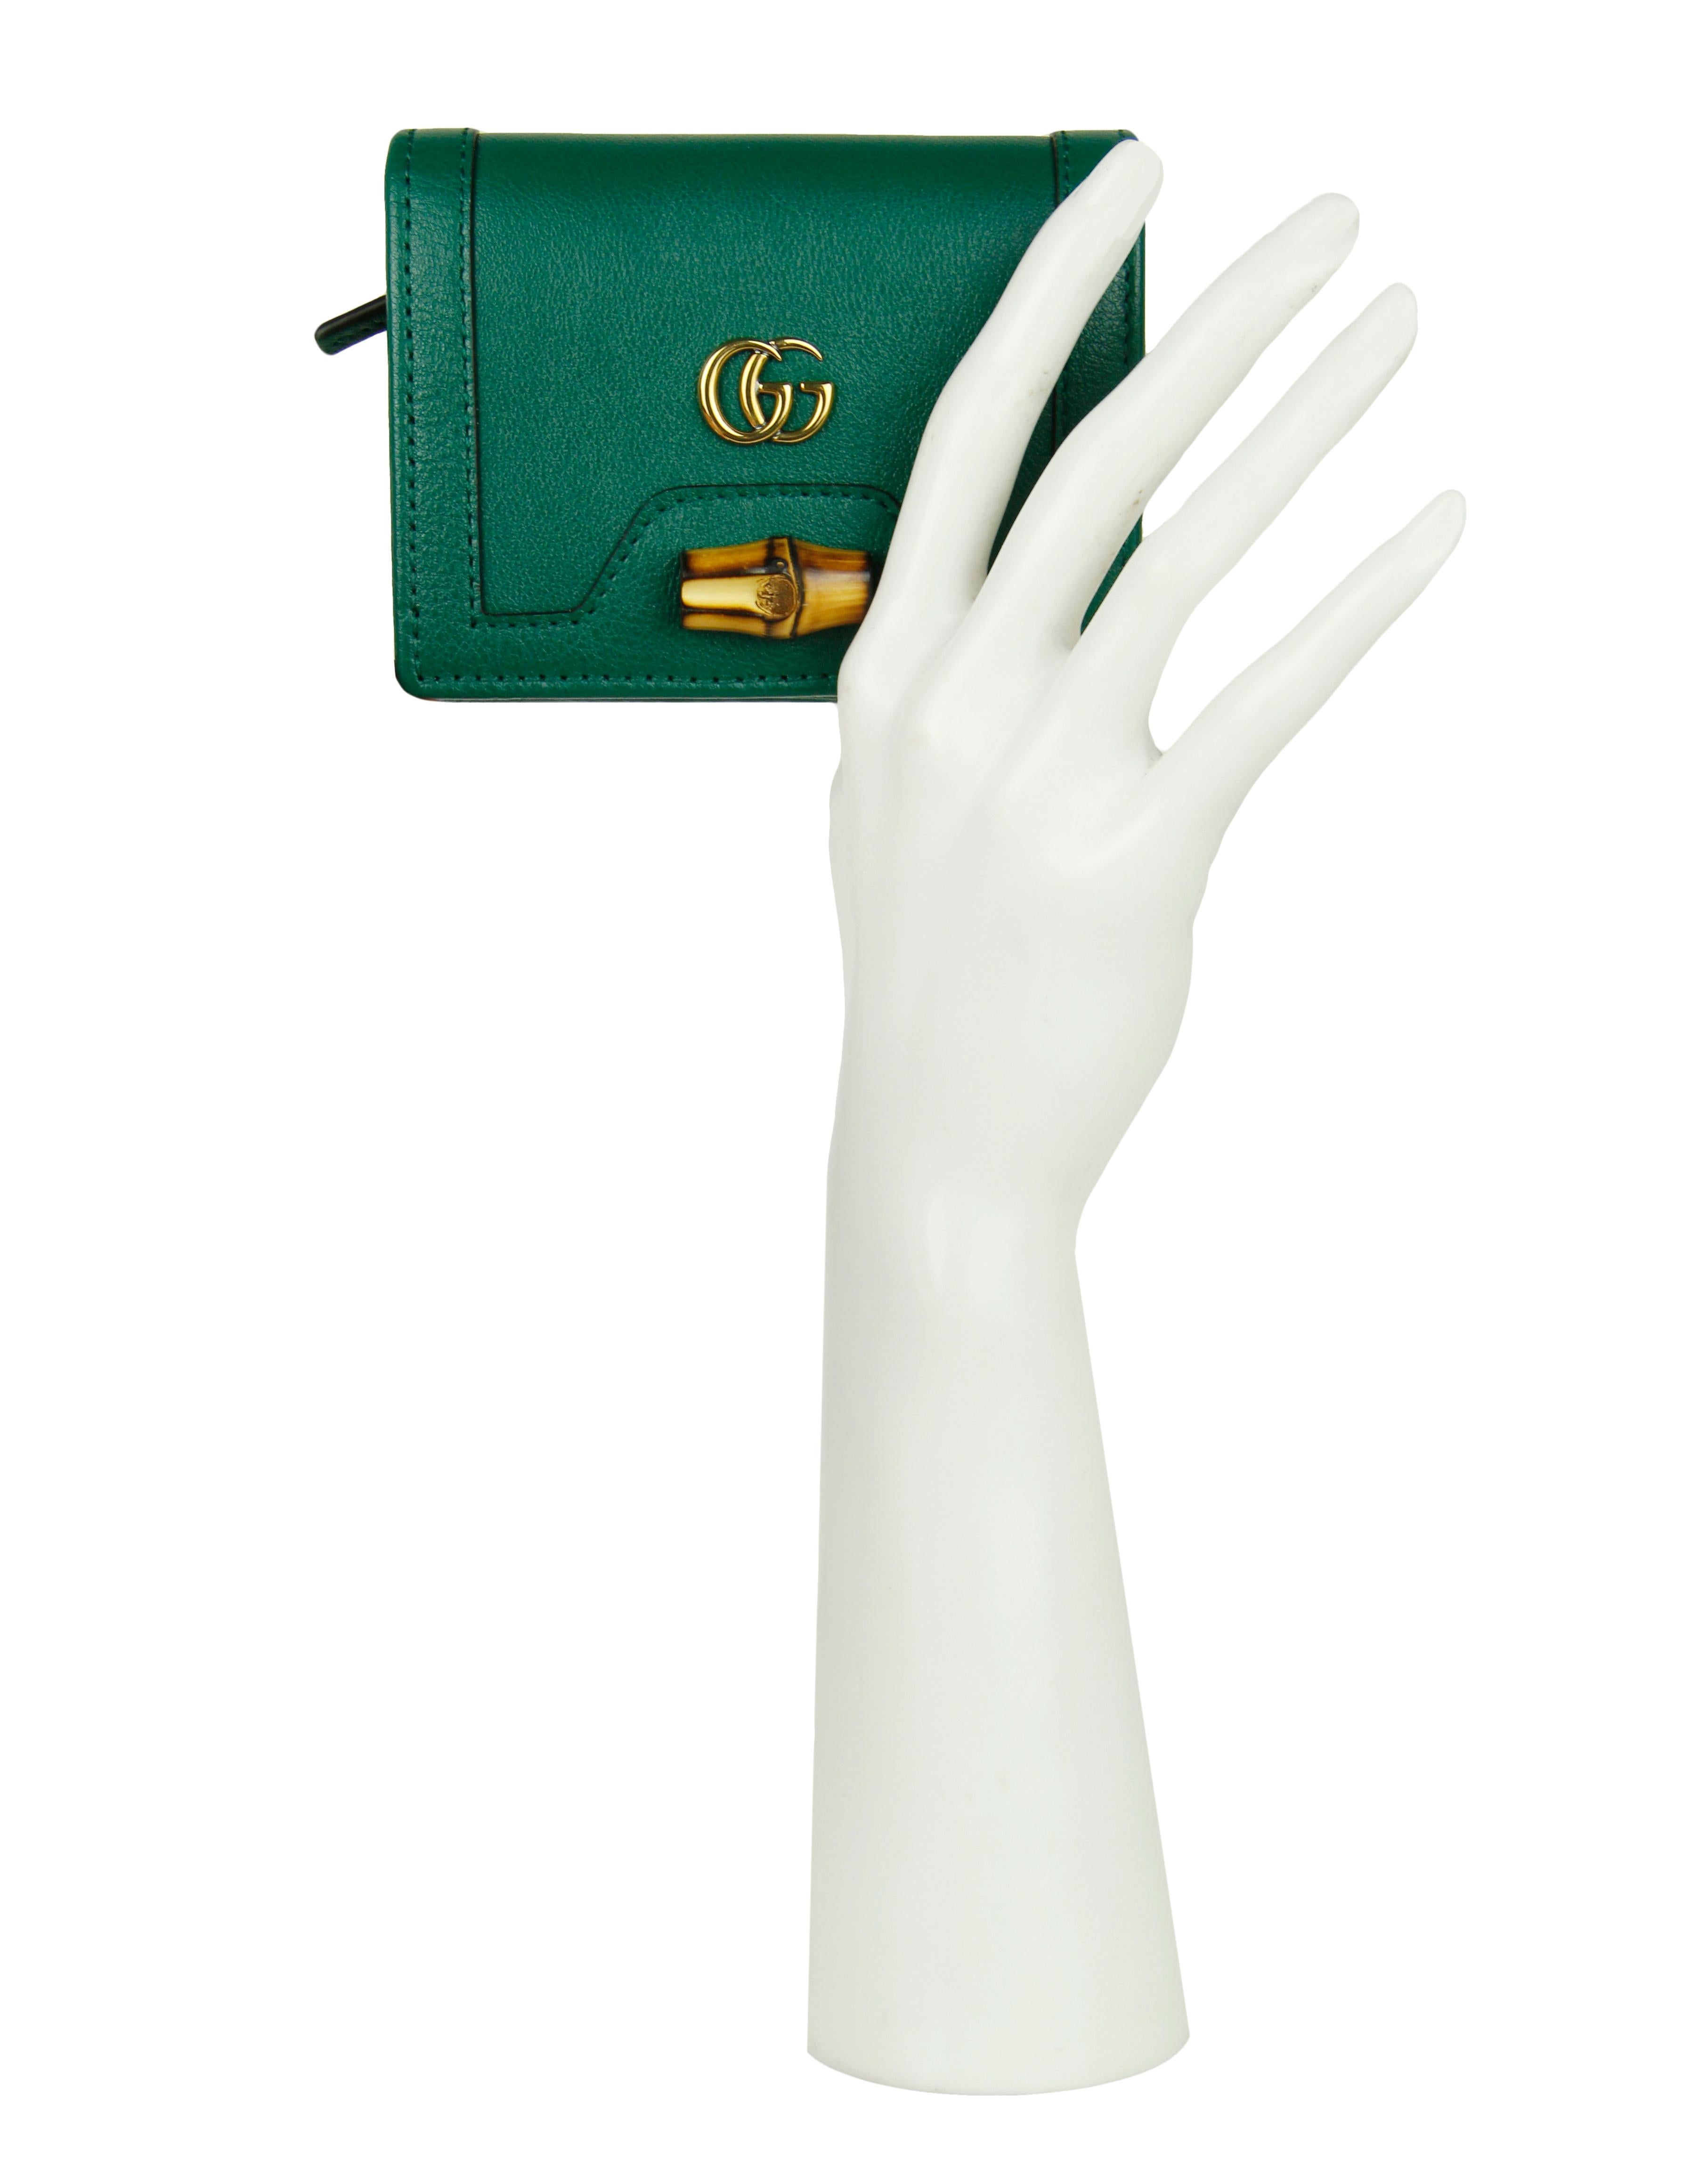 Gucci 658244 493075 Emerald Green Calfskin Leather Diana Bamboo Card Case Wallet

Made In: Italy
Year of Production: 2021
Color: Emerald green
Hardware: Antiqued goldtone
Materials: Calfskin leather
Lining: Leather and Viscose
Closure/Opening: